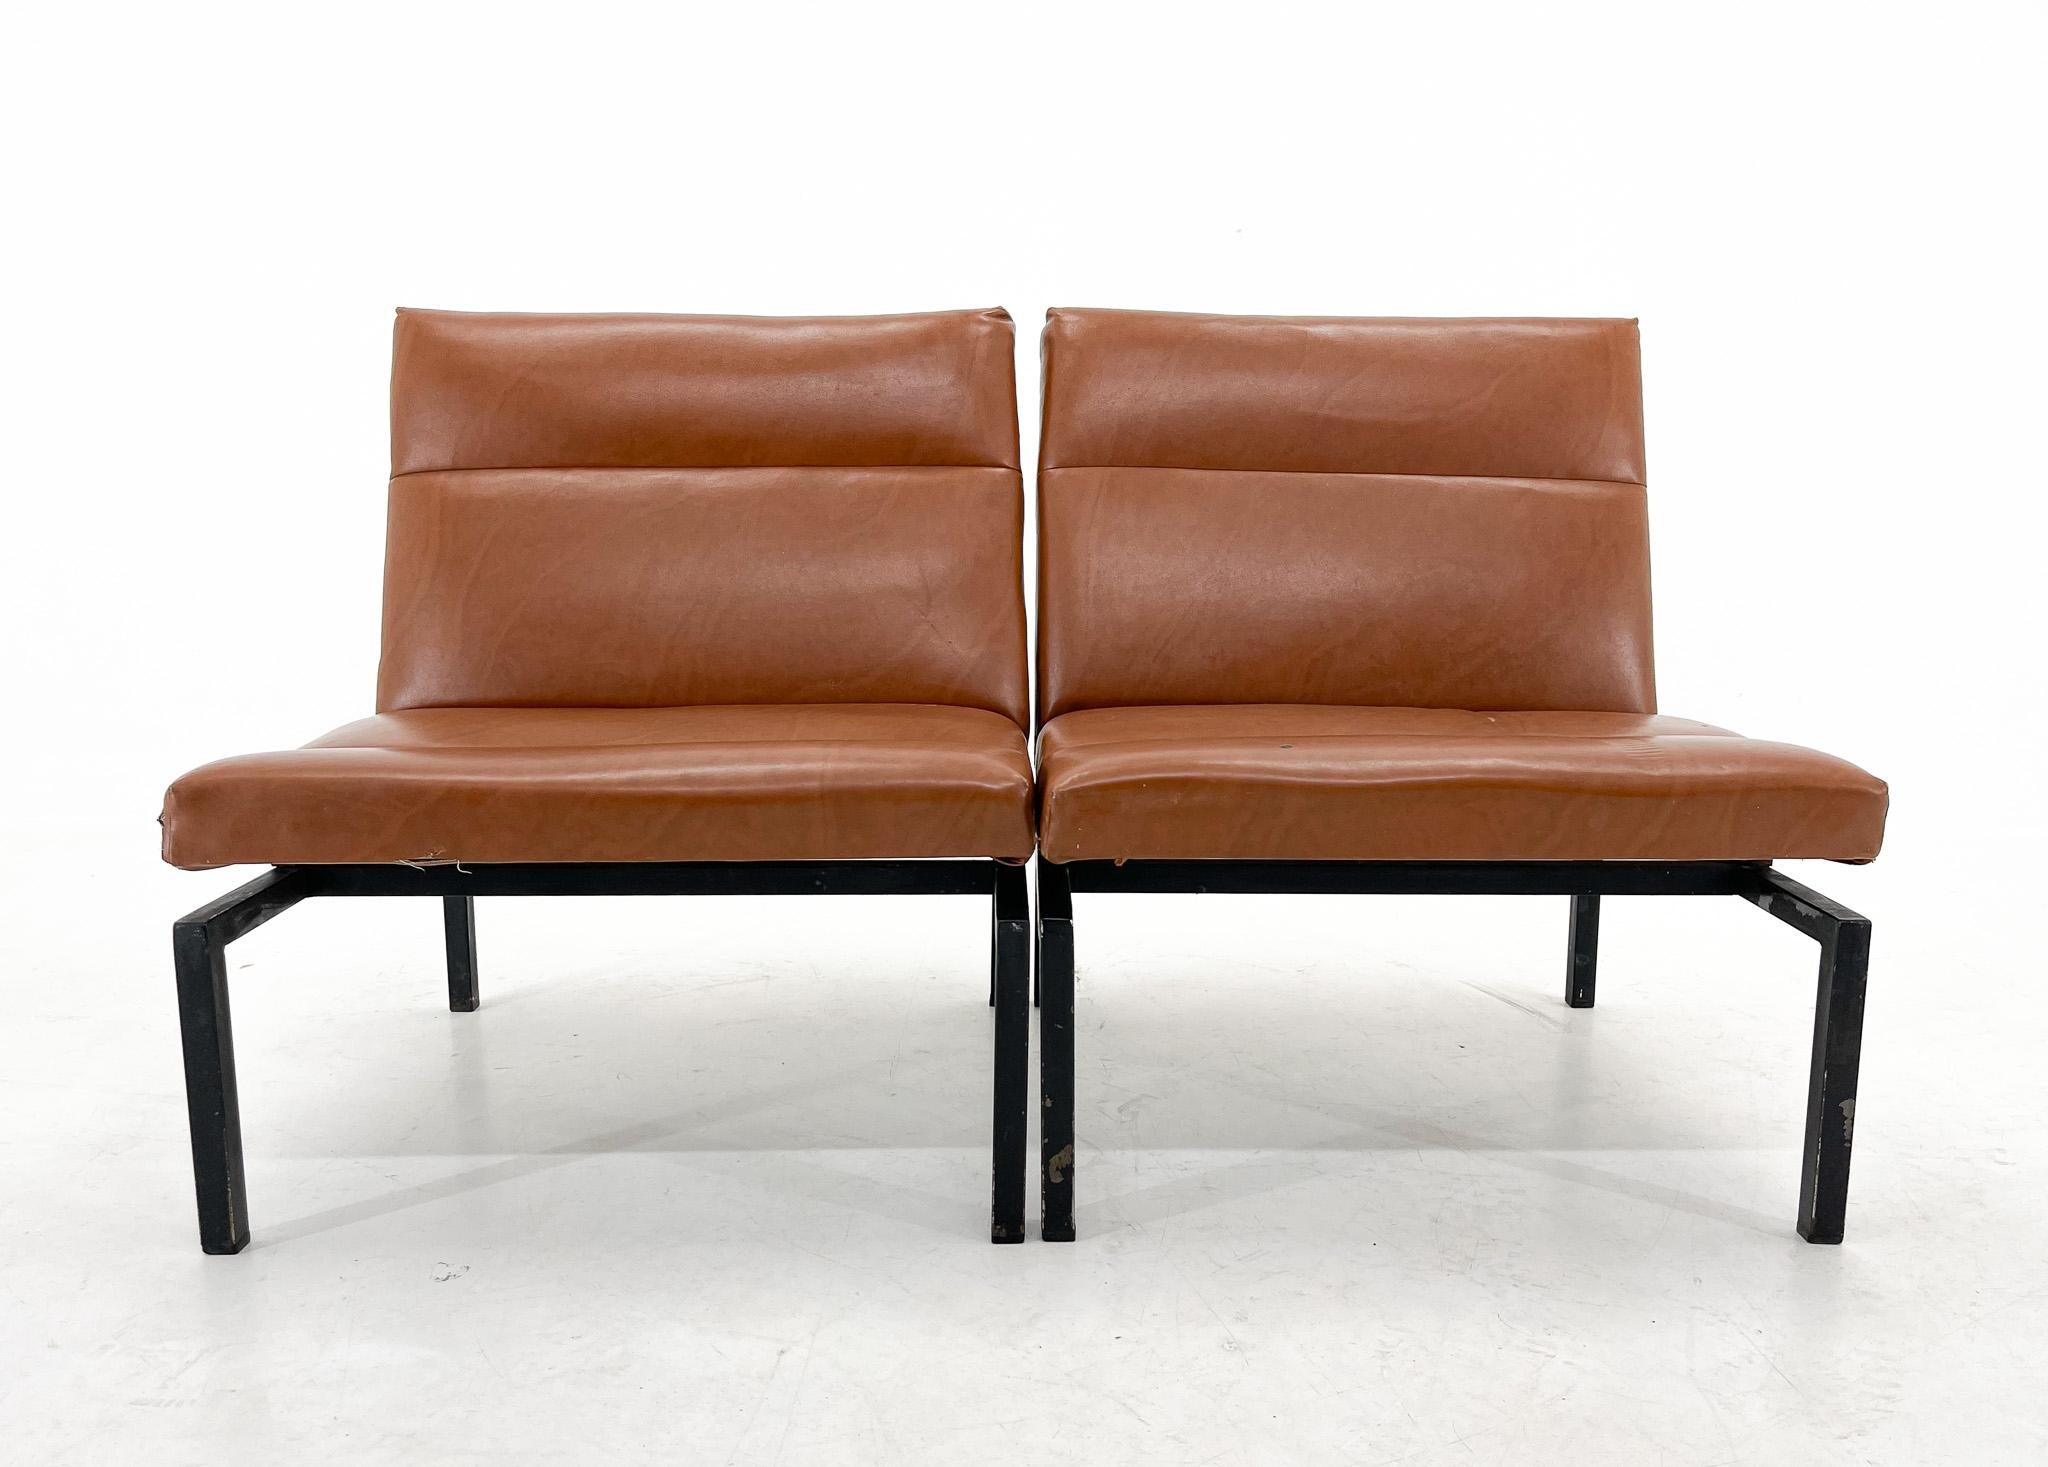 Czech Midcentury Faux Leather & Metal Lounge Chairs, 2 Pieces Available For Sale